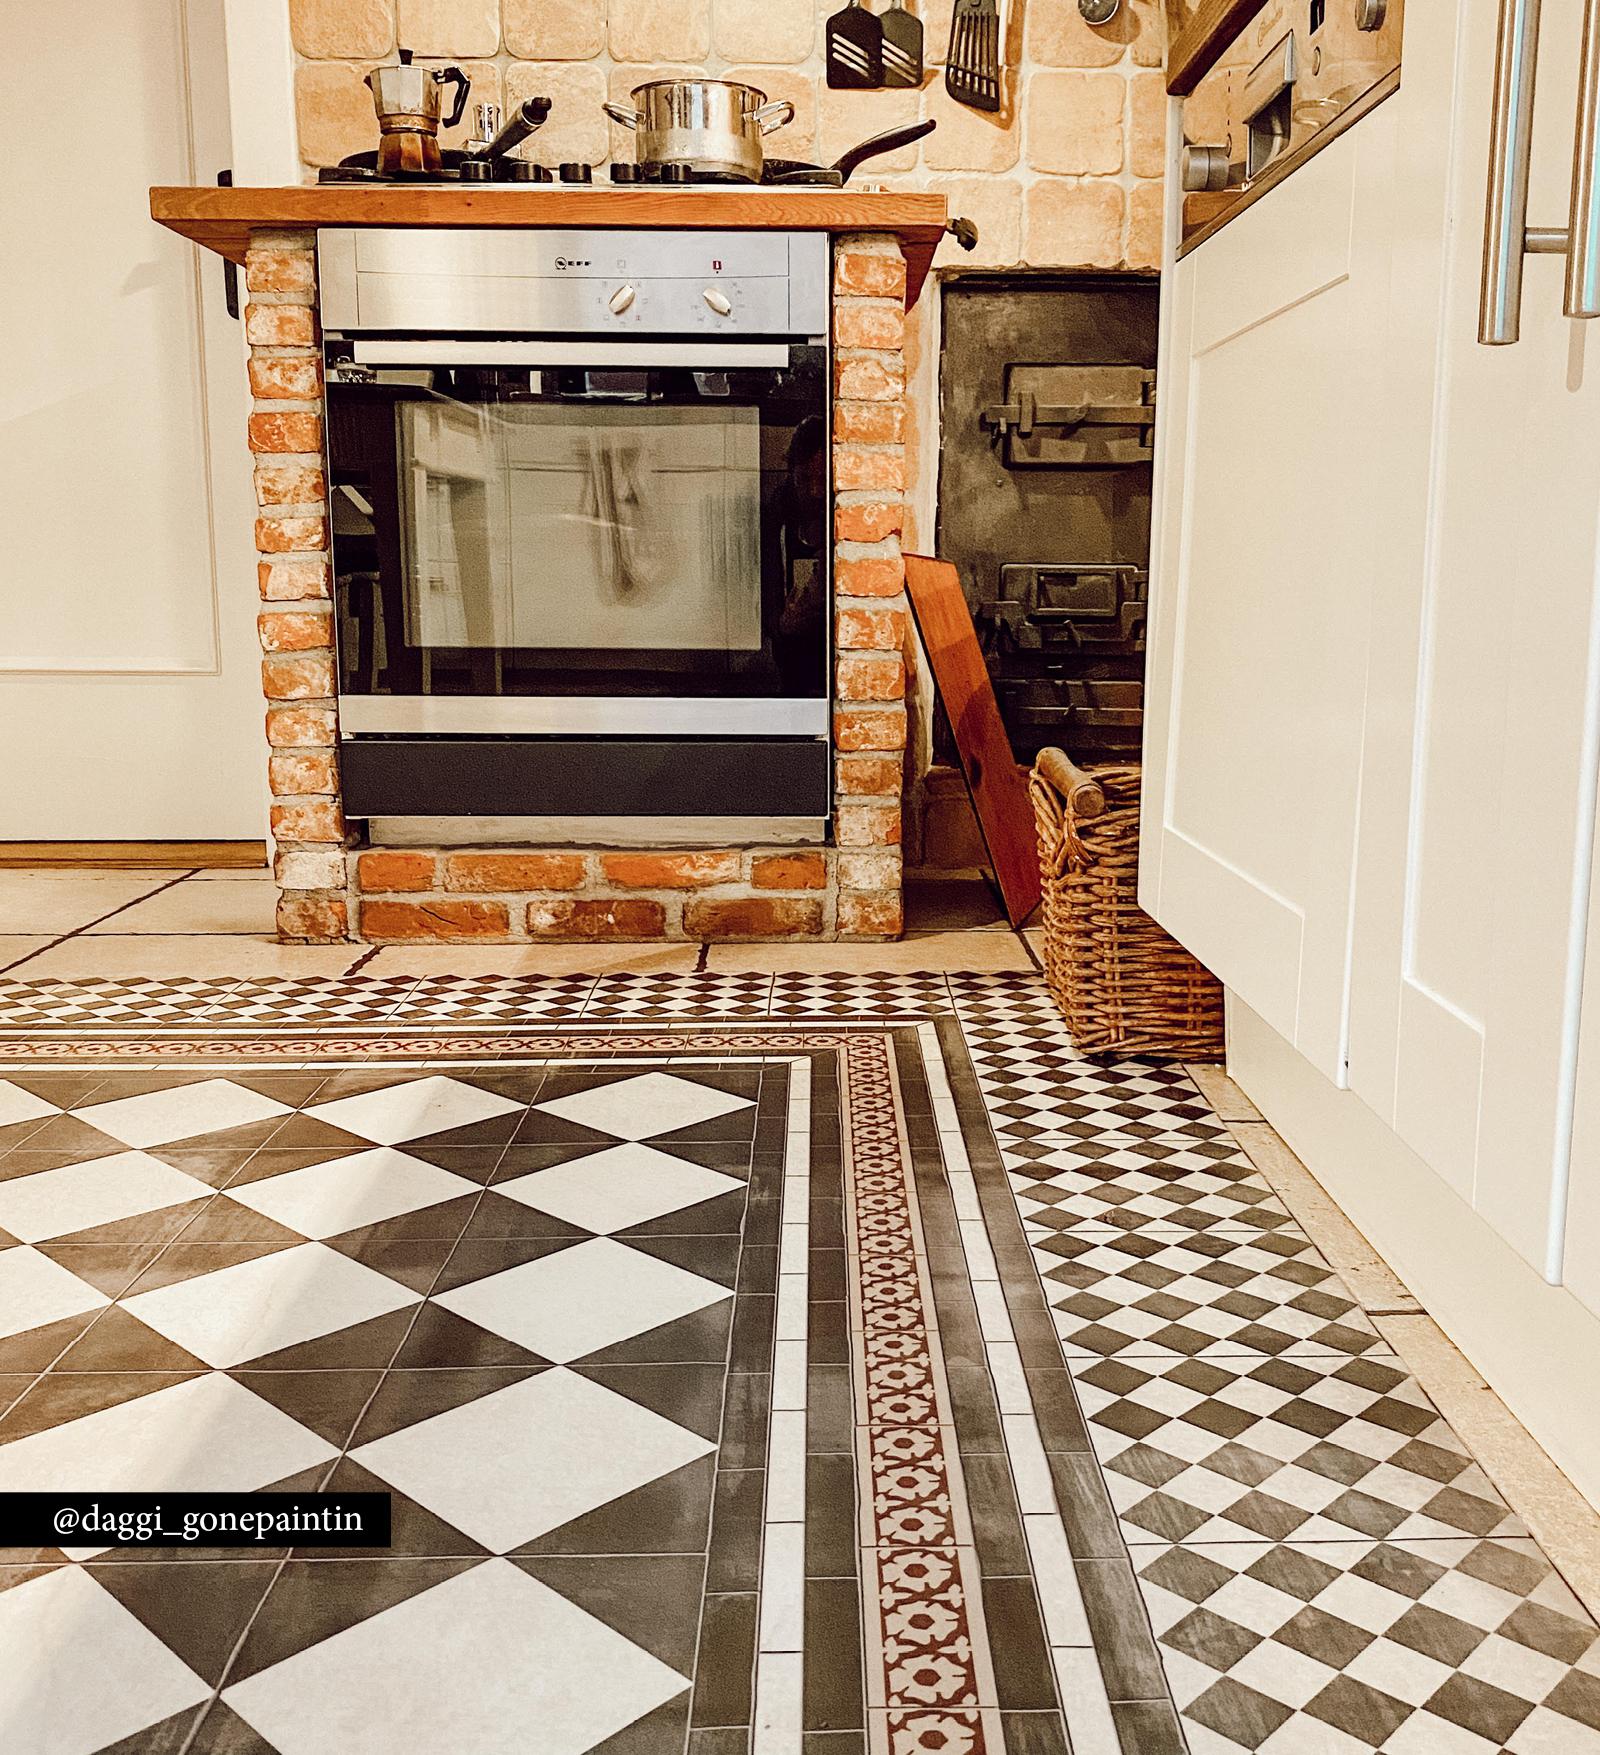  black and white chess board patterned rug placed next to stove 